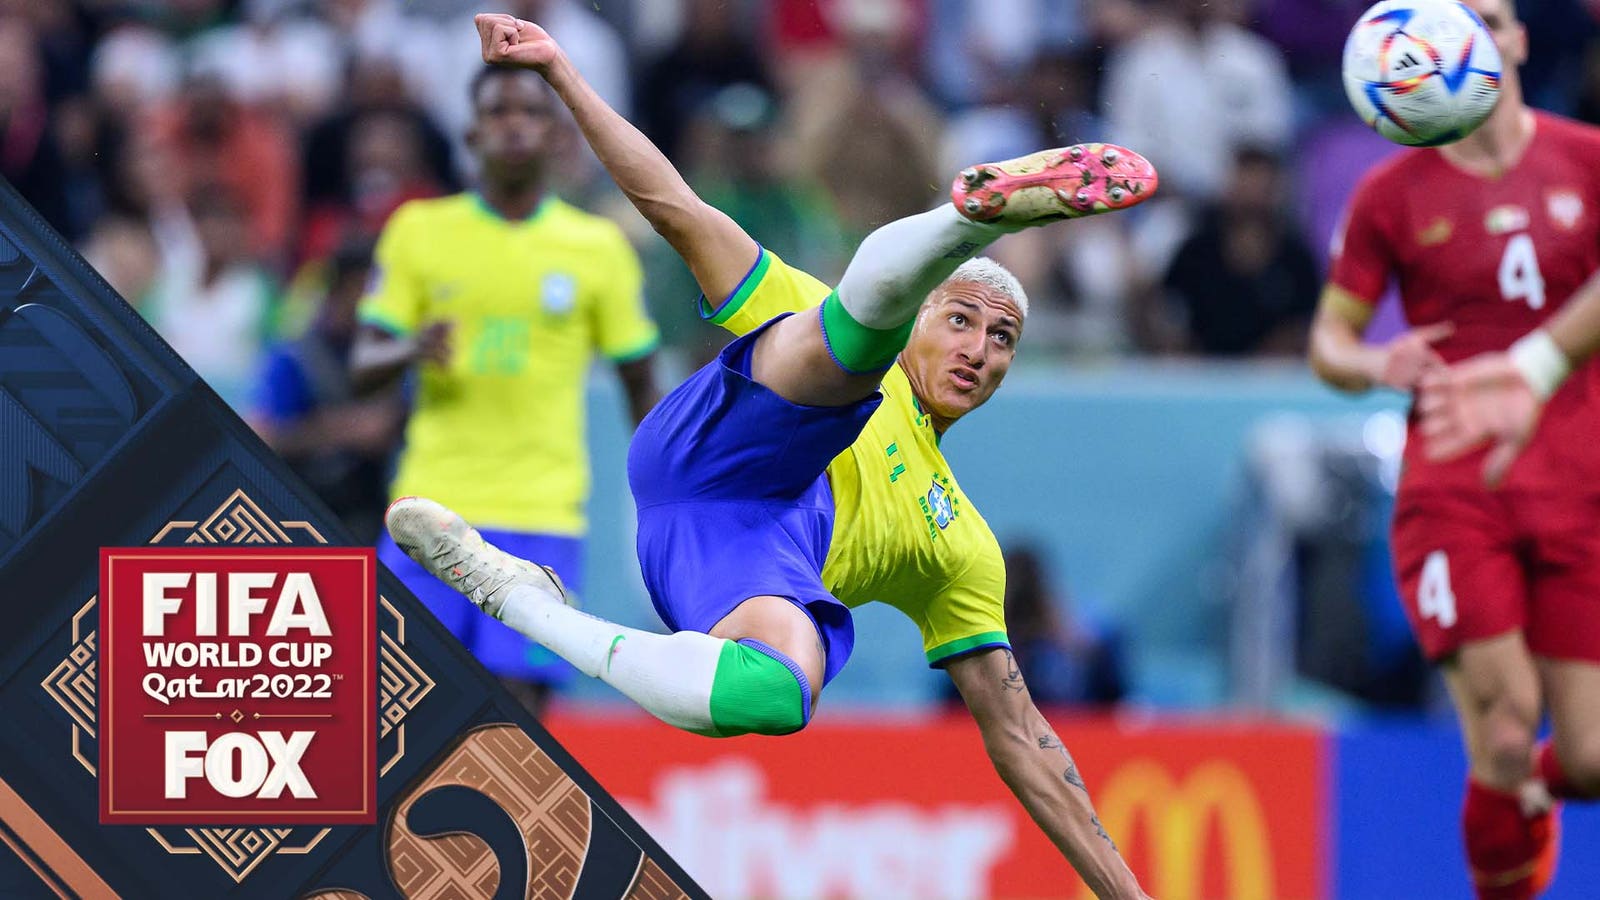 Every angle of Richarlison's JAW-DROPPING scissor kick goal for Brazil in the 2022 FIFA World Cup